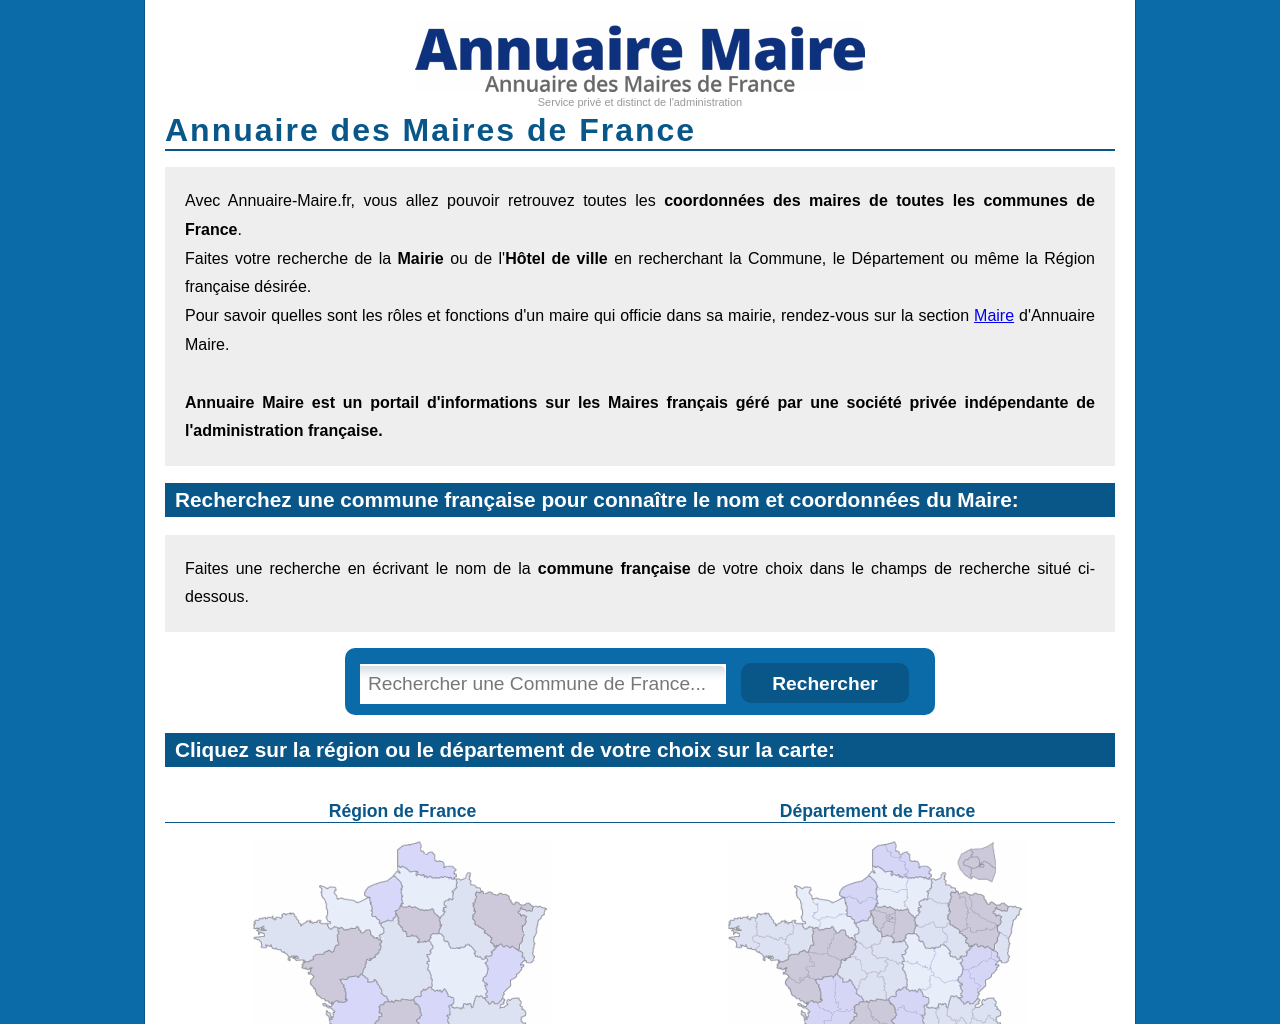 www.annuaire-maire.fr